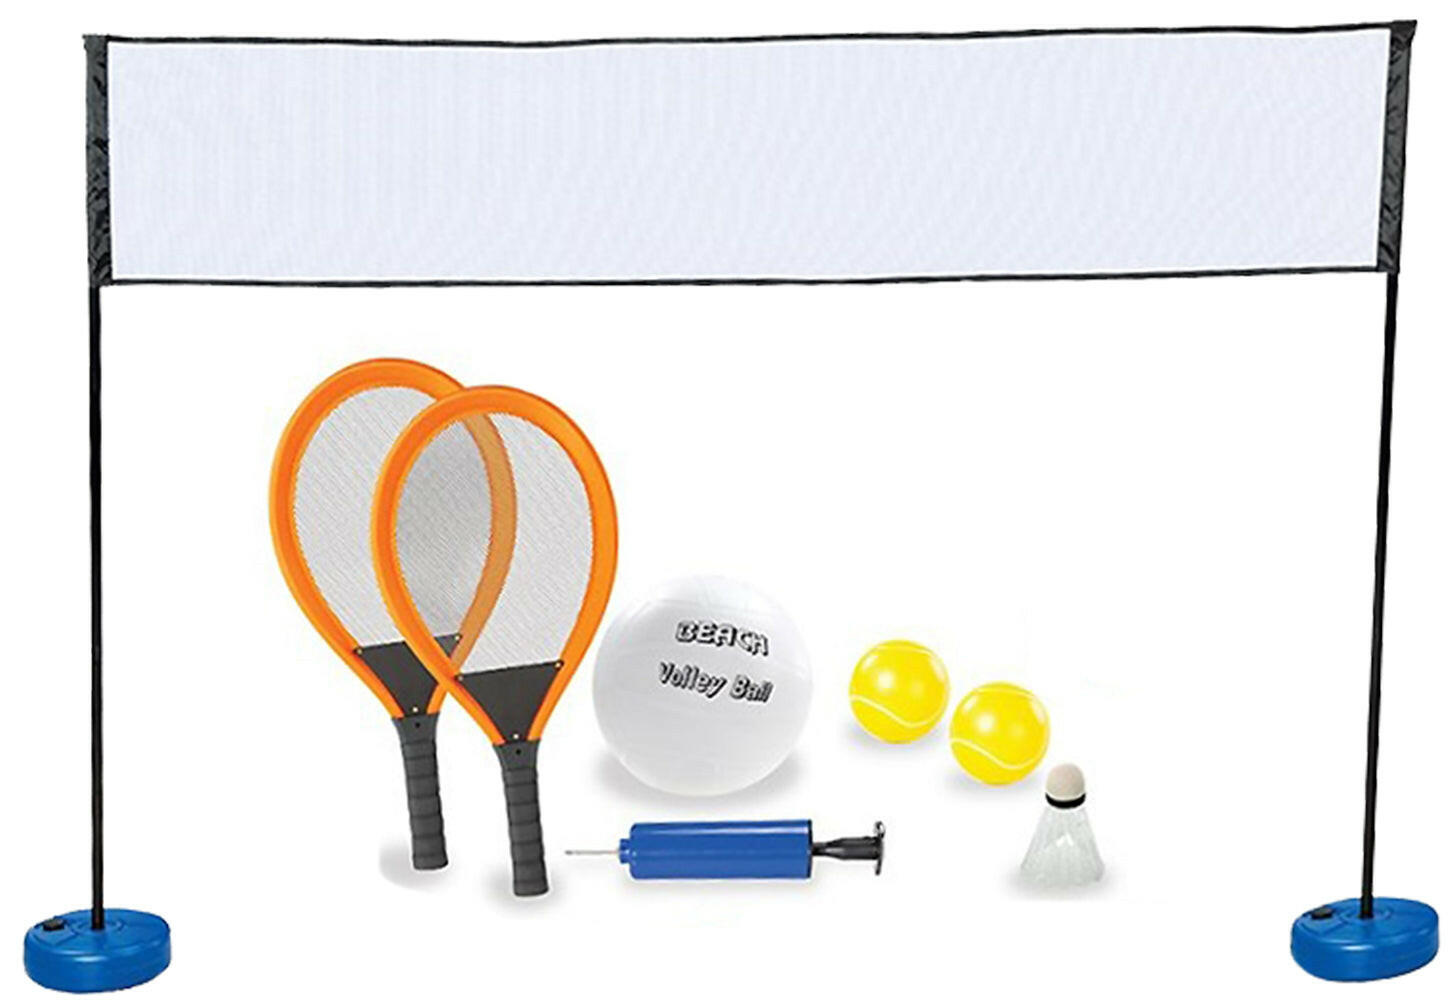 3 In 1 Game Set with Portable Net.